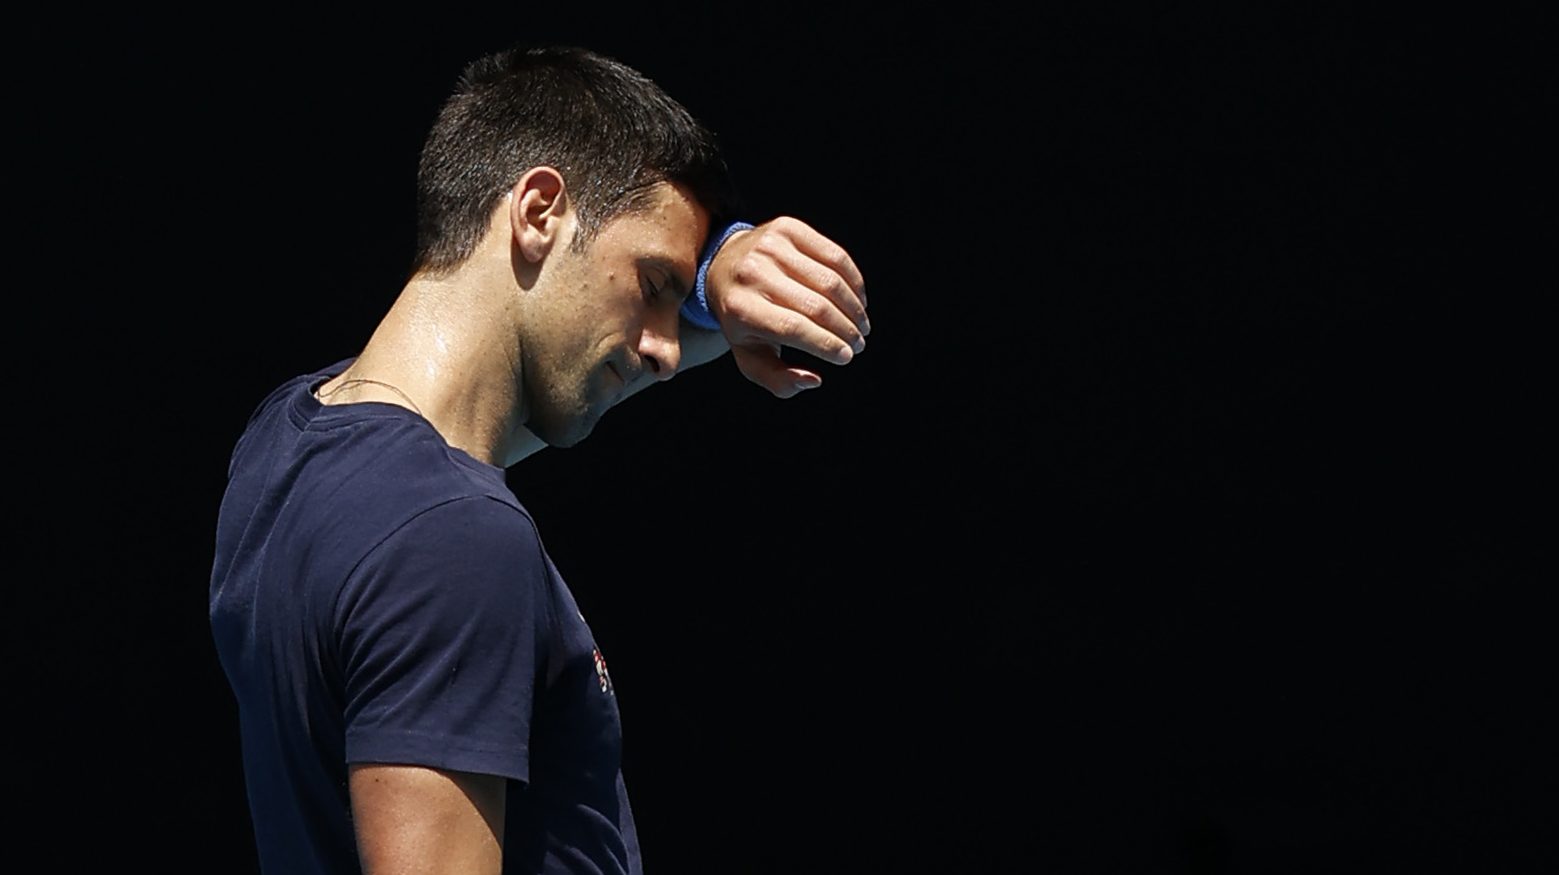 Ruled Out: Australia Deports Djokovic for Being Unvaccinated